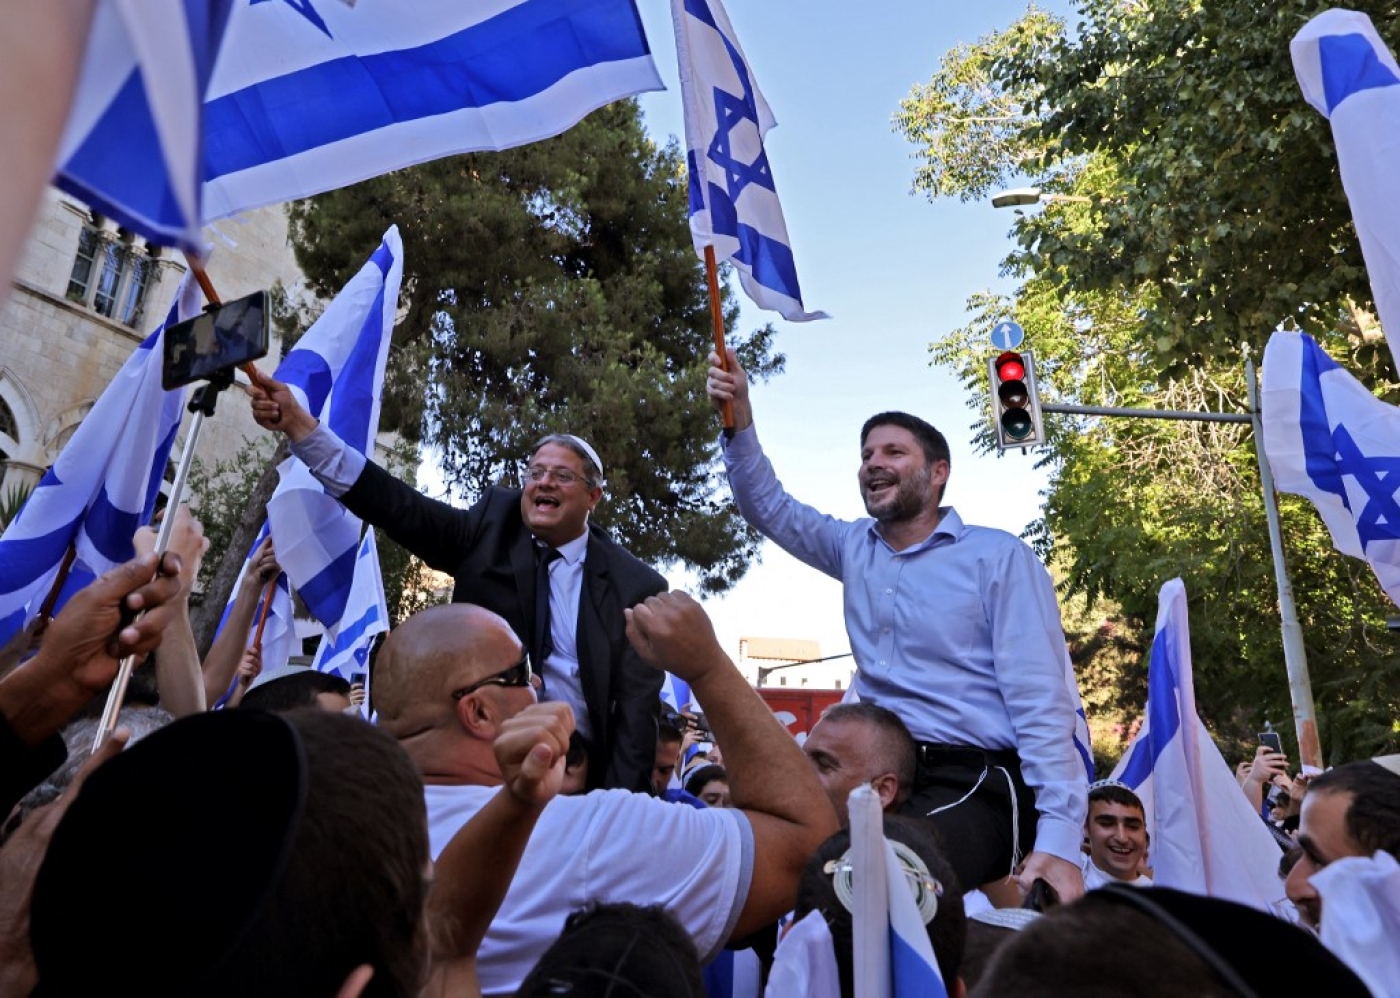 Israeli far-right lawmakers Bezalel Smotrich (R) and Itamar Ben-Gvir take part in the ultranationalist March of the Flags near Jerusalem's Old City, on June 15, 2021